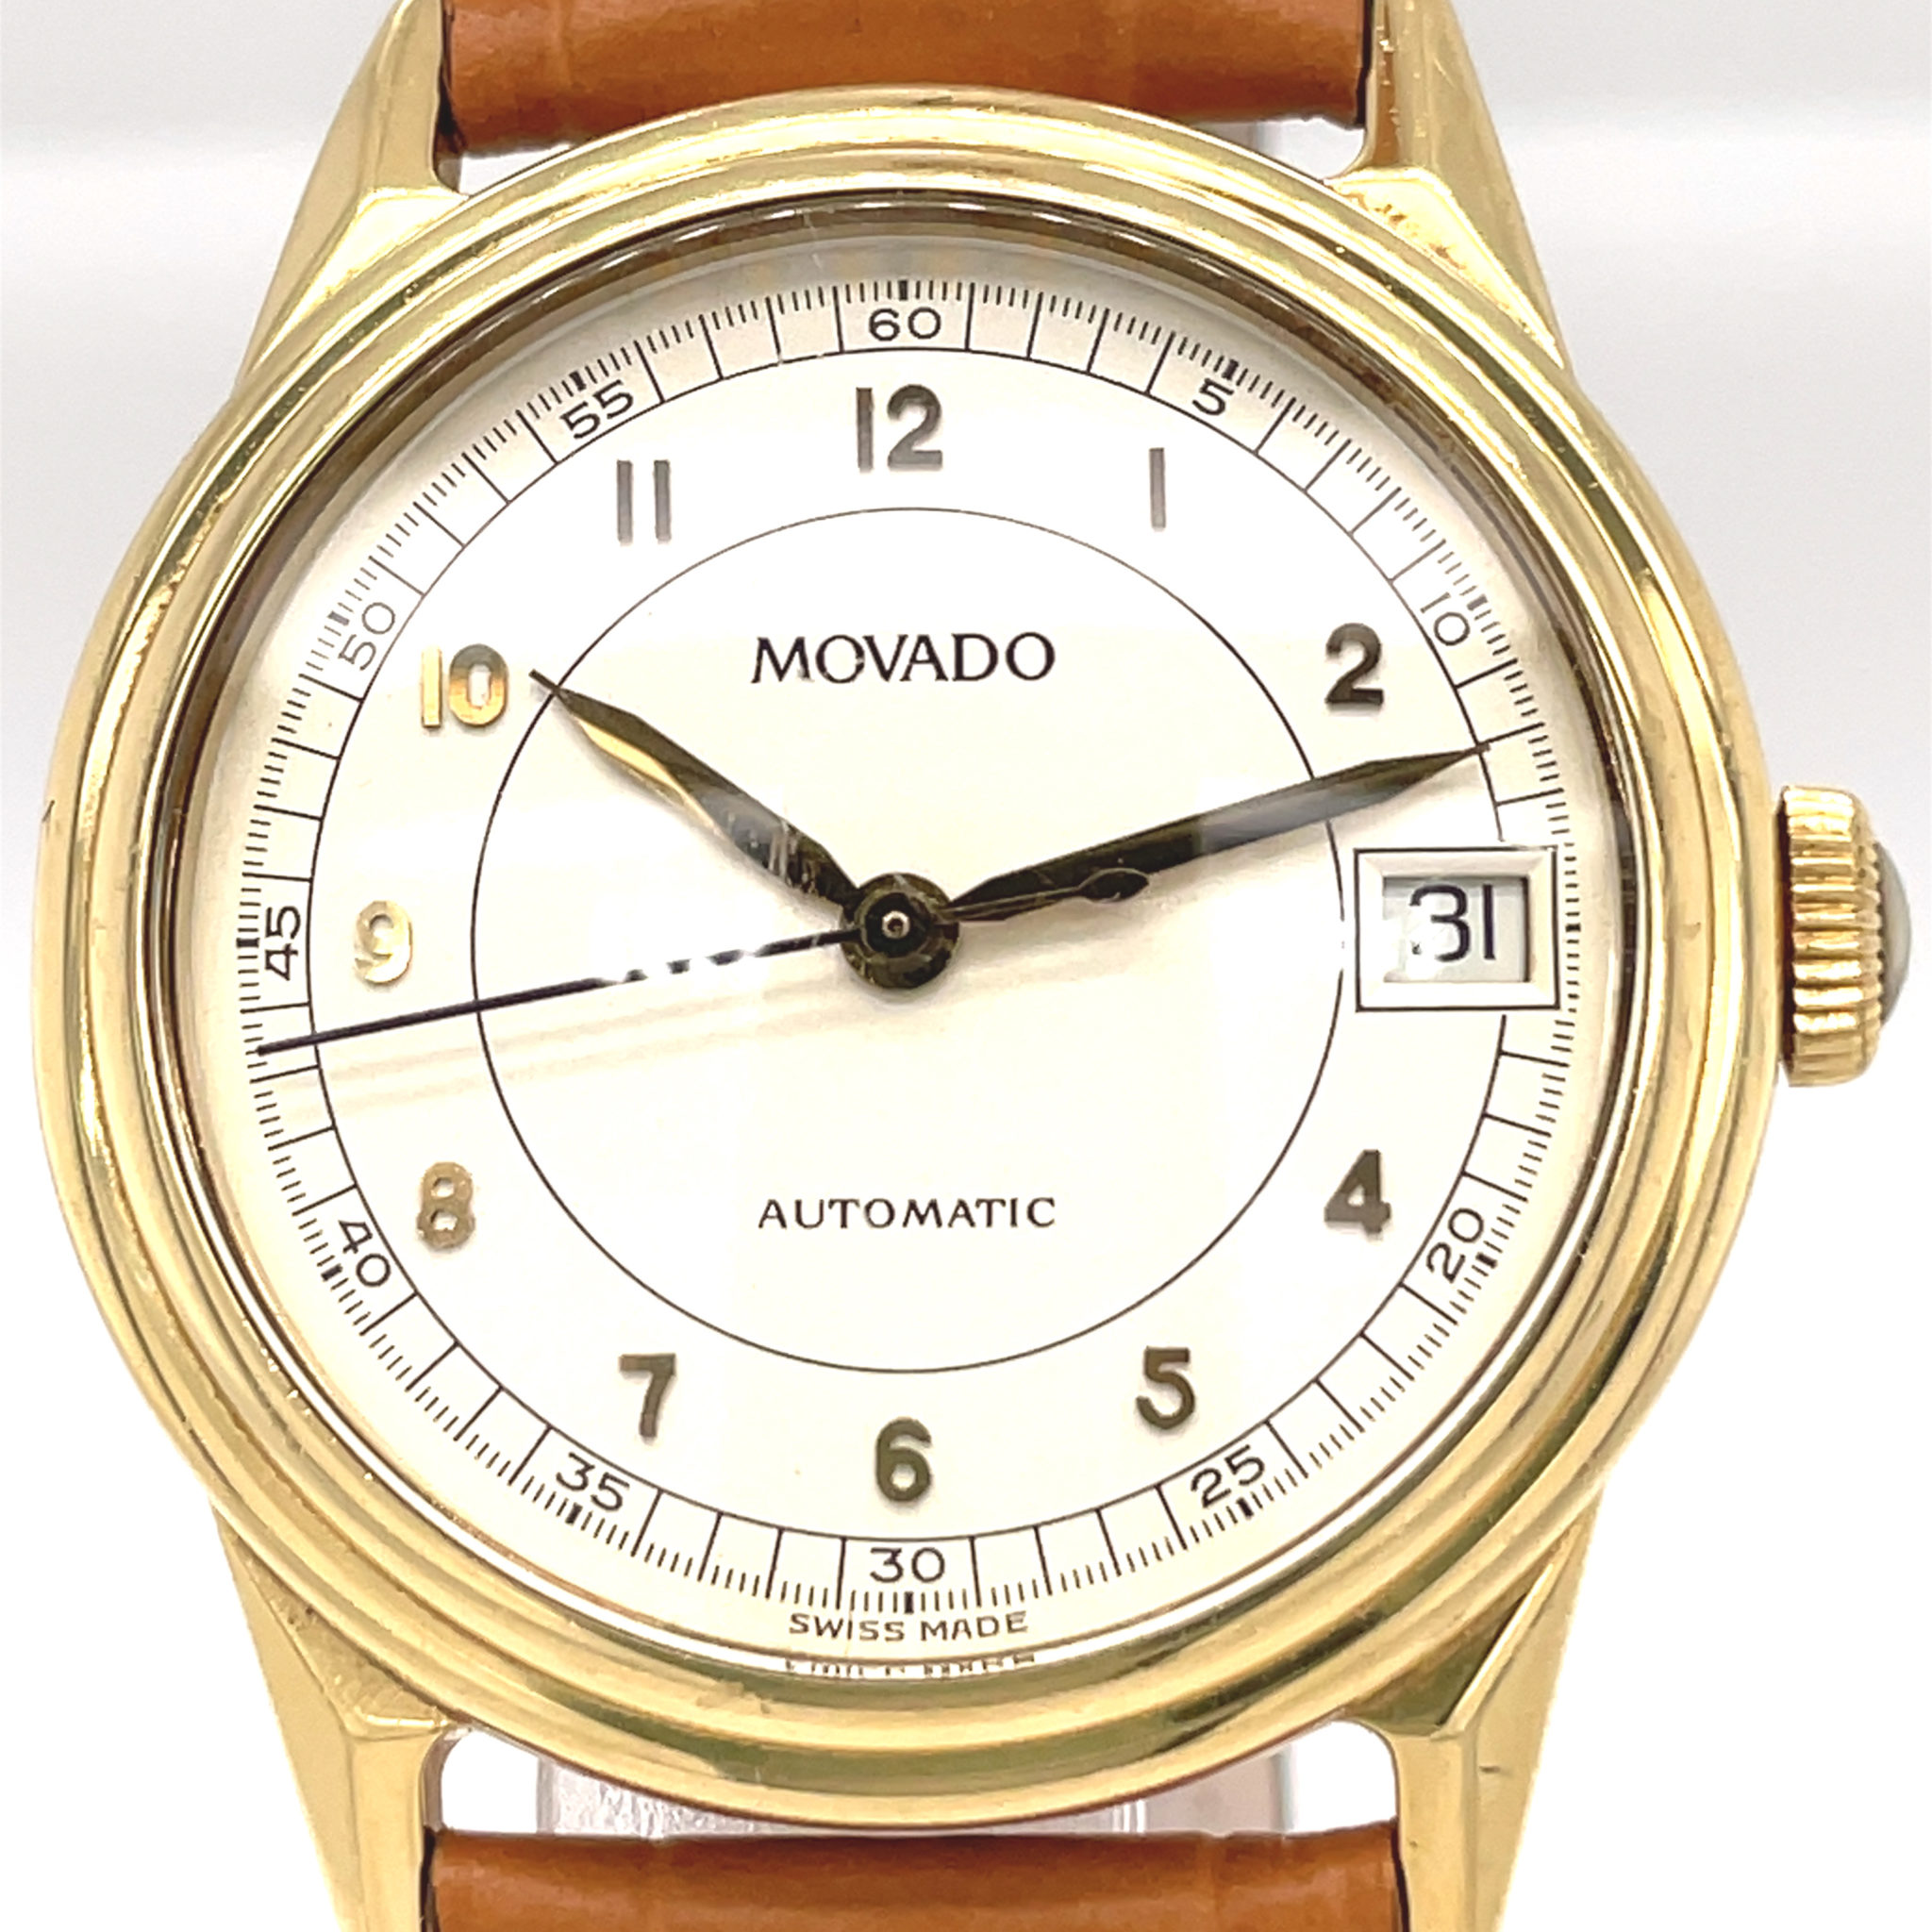 Movado 1881 Suisse No. 131. Ref. 40.A9.880 18k/750GG, automatic Limited Edition